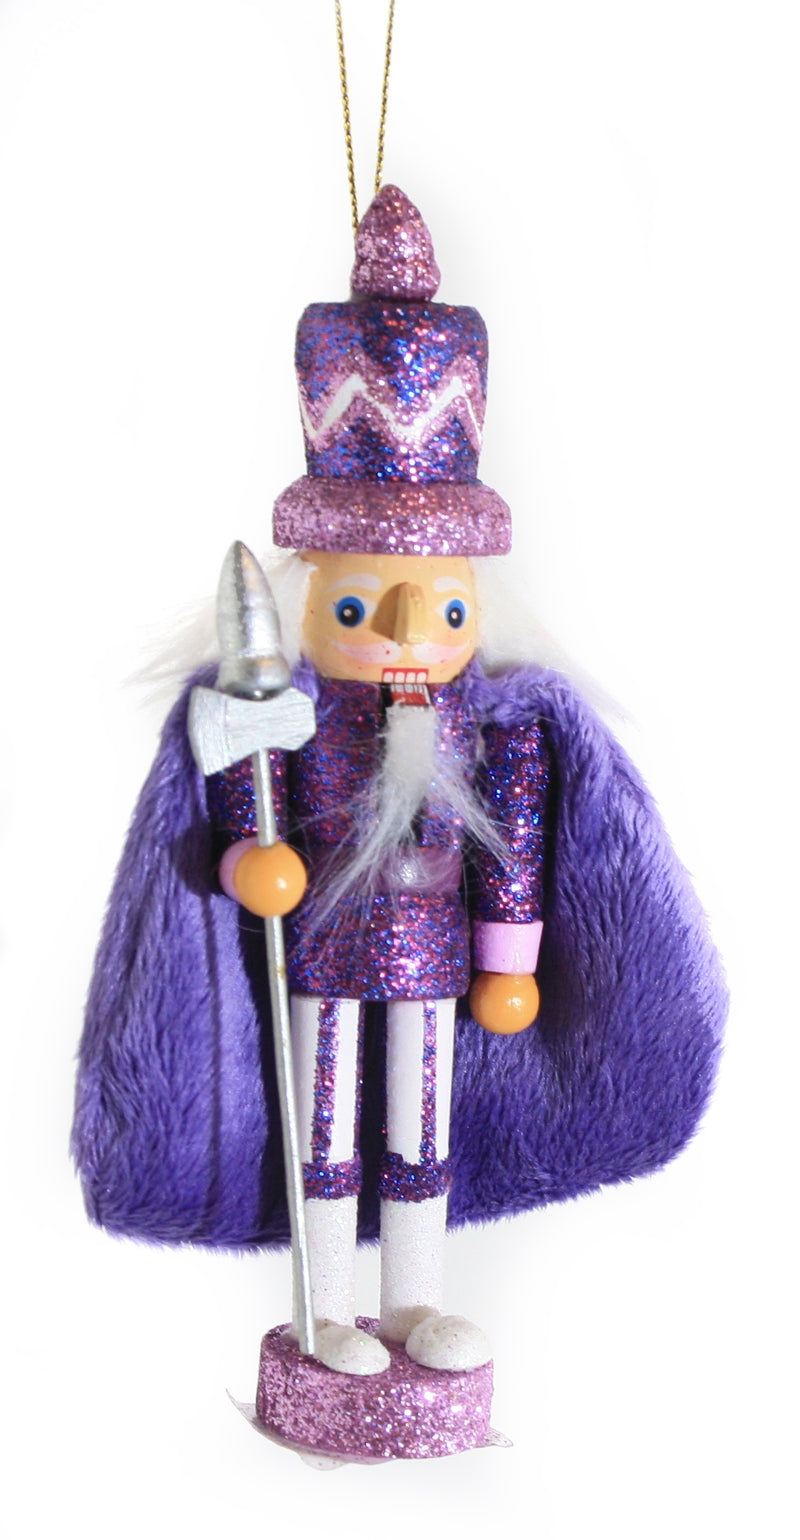 Hollywood 6 inch Wooden Nutcracker - Purple - The Country Christmas Loft